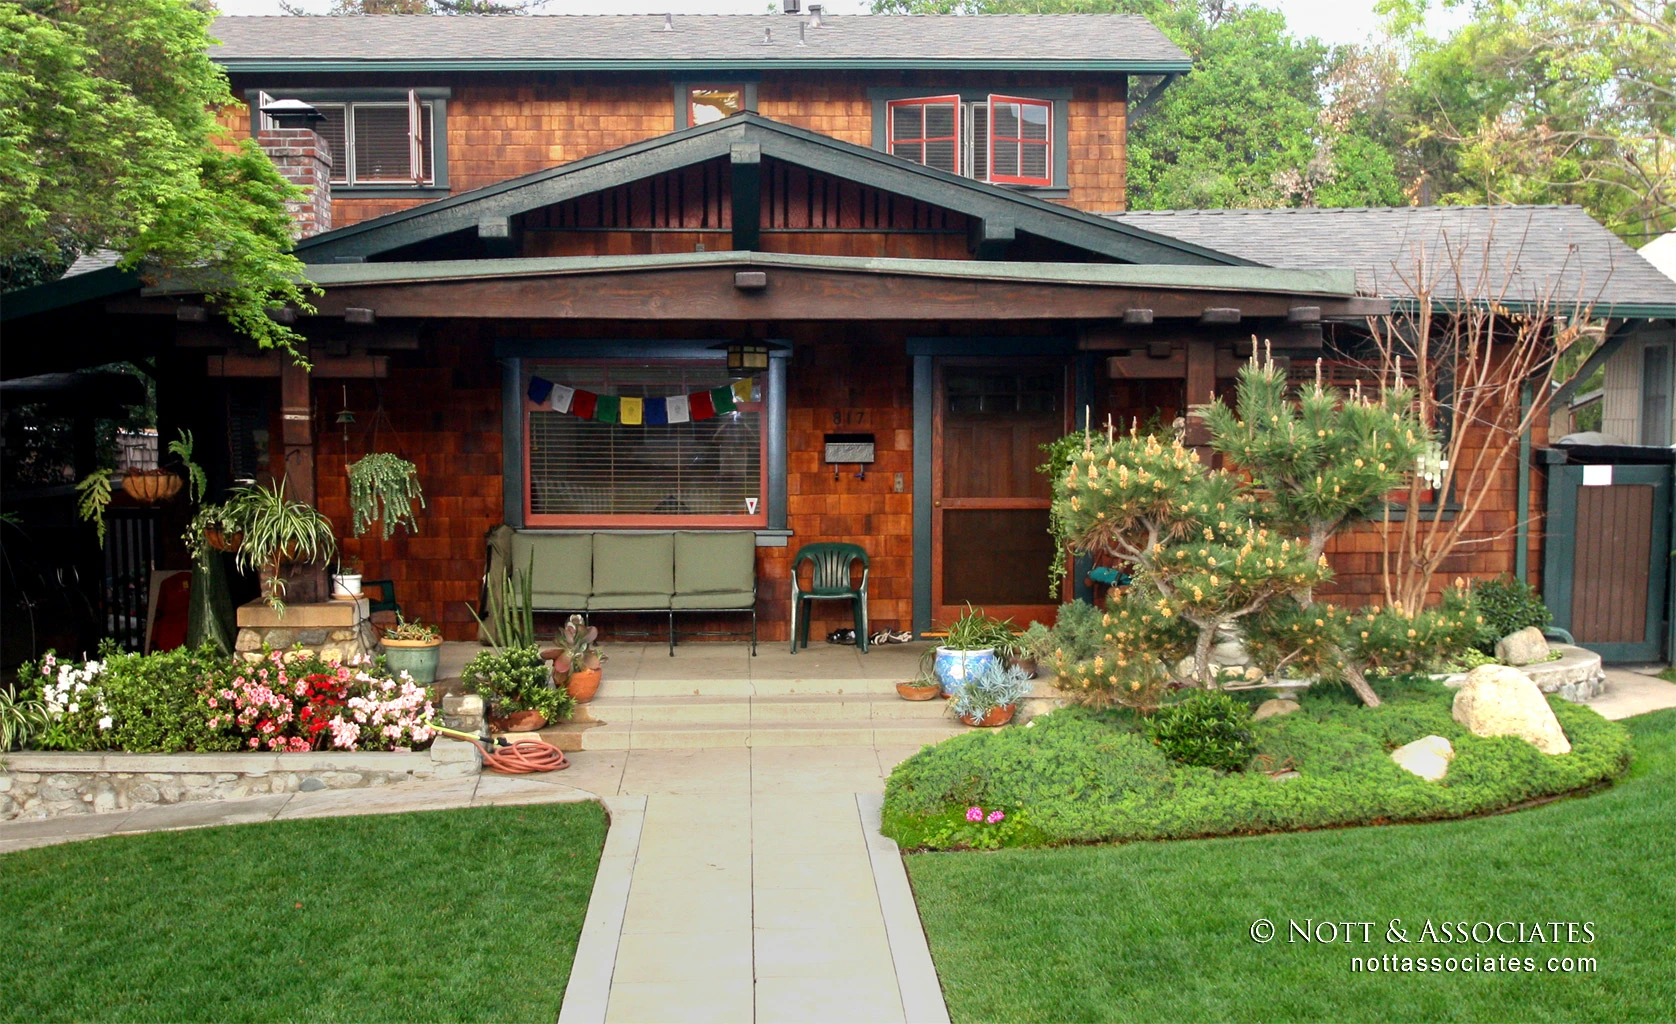 After photo of a restored craftsman home with an added second story and new siding.